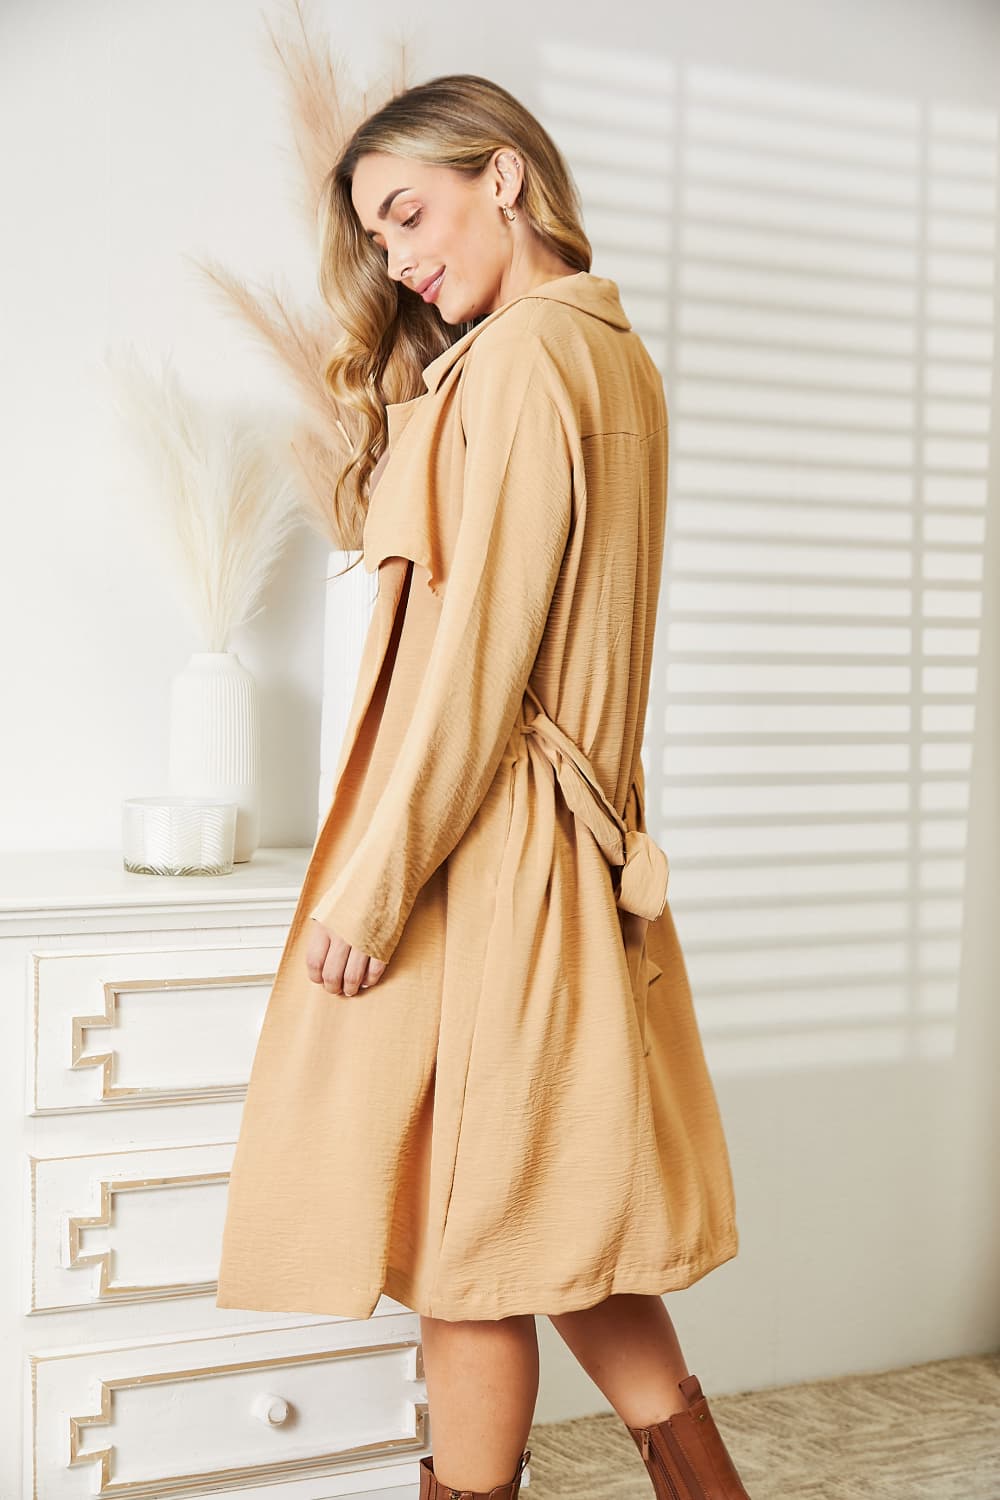 Tied in Knots Light Trench Coat